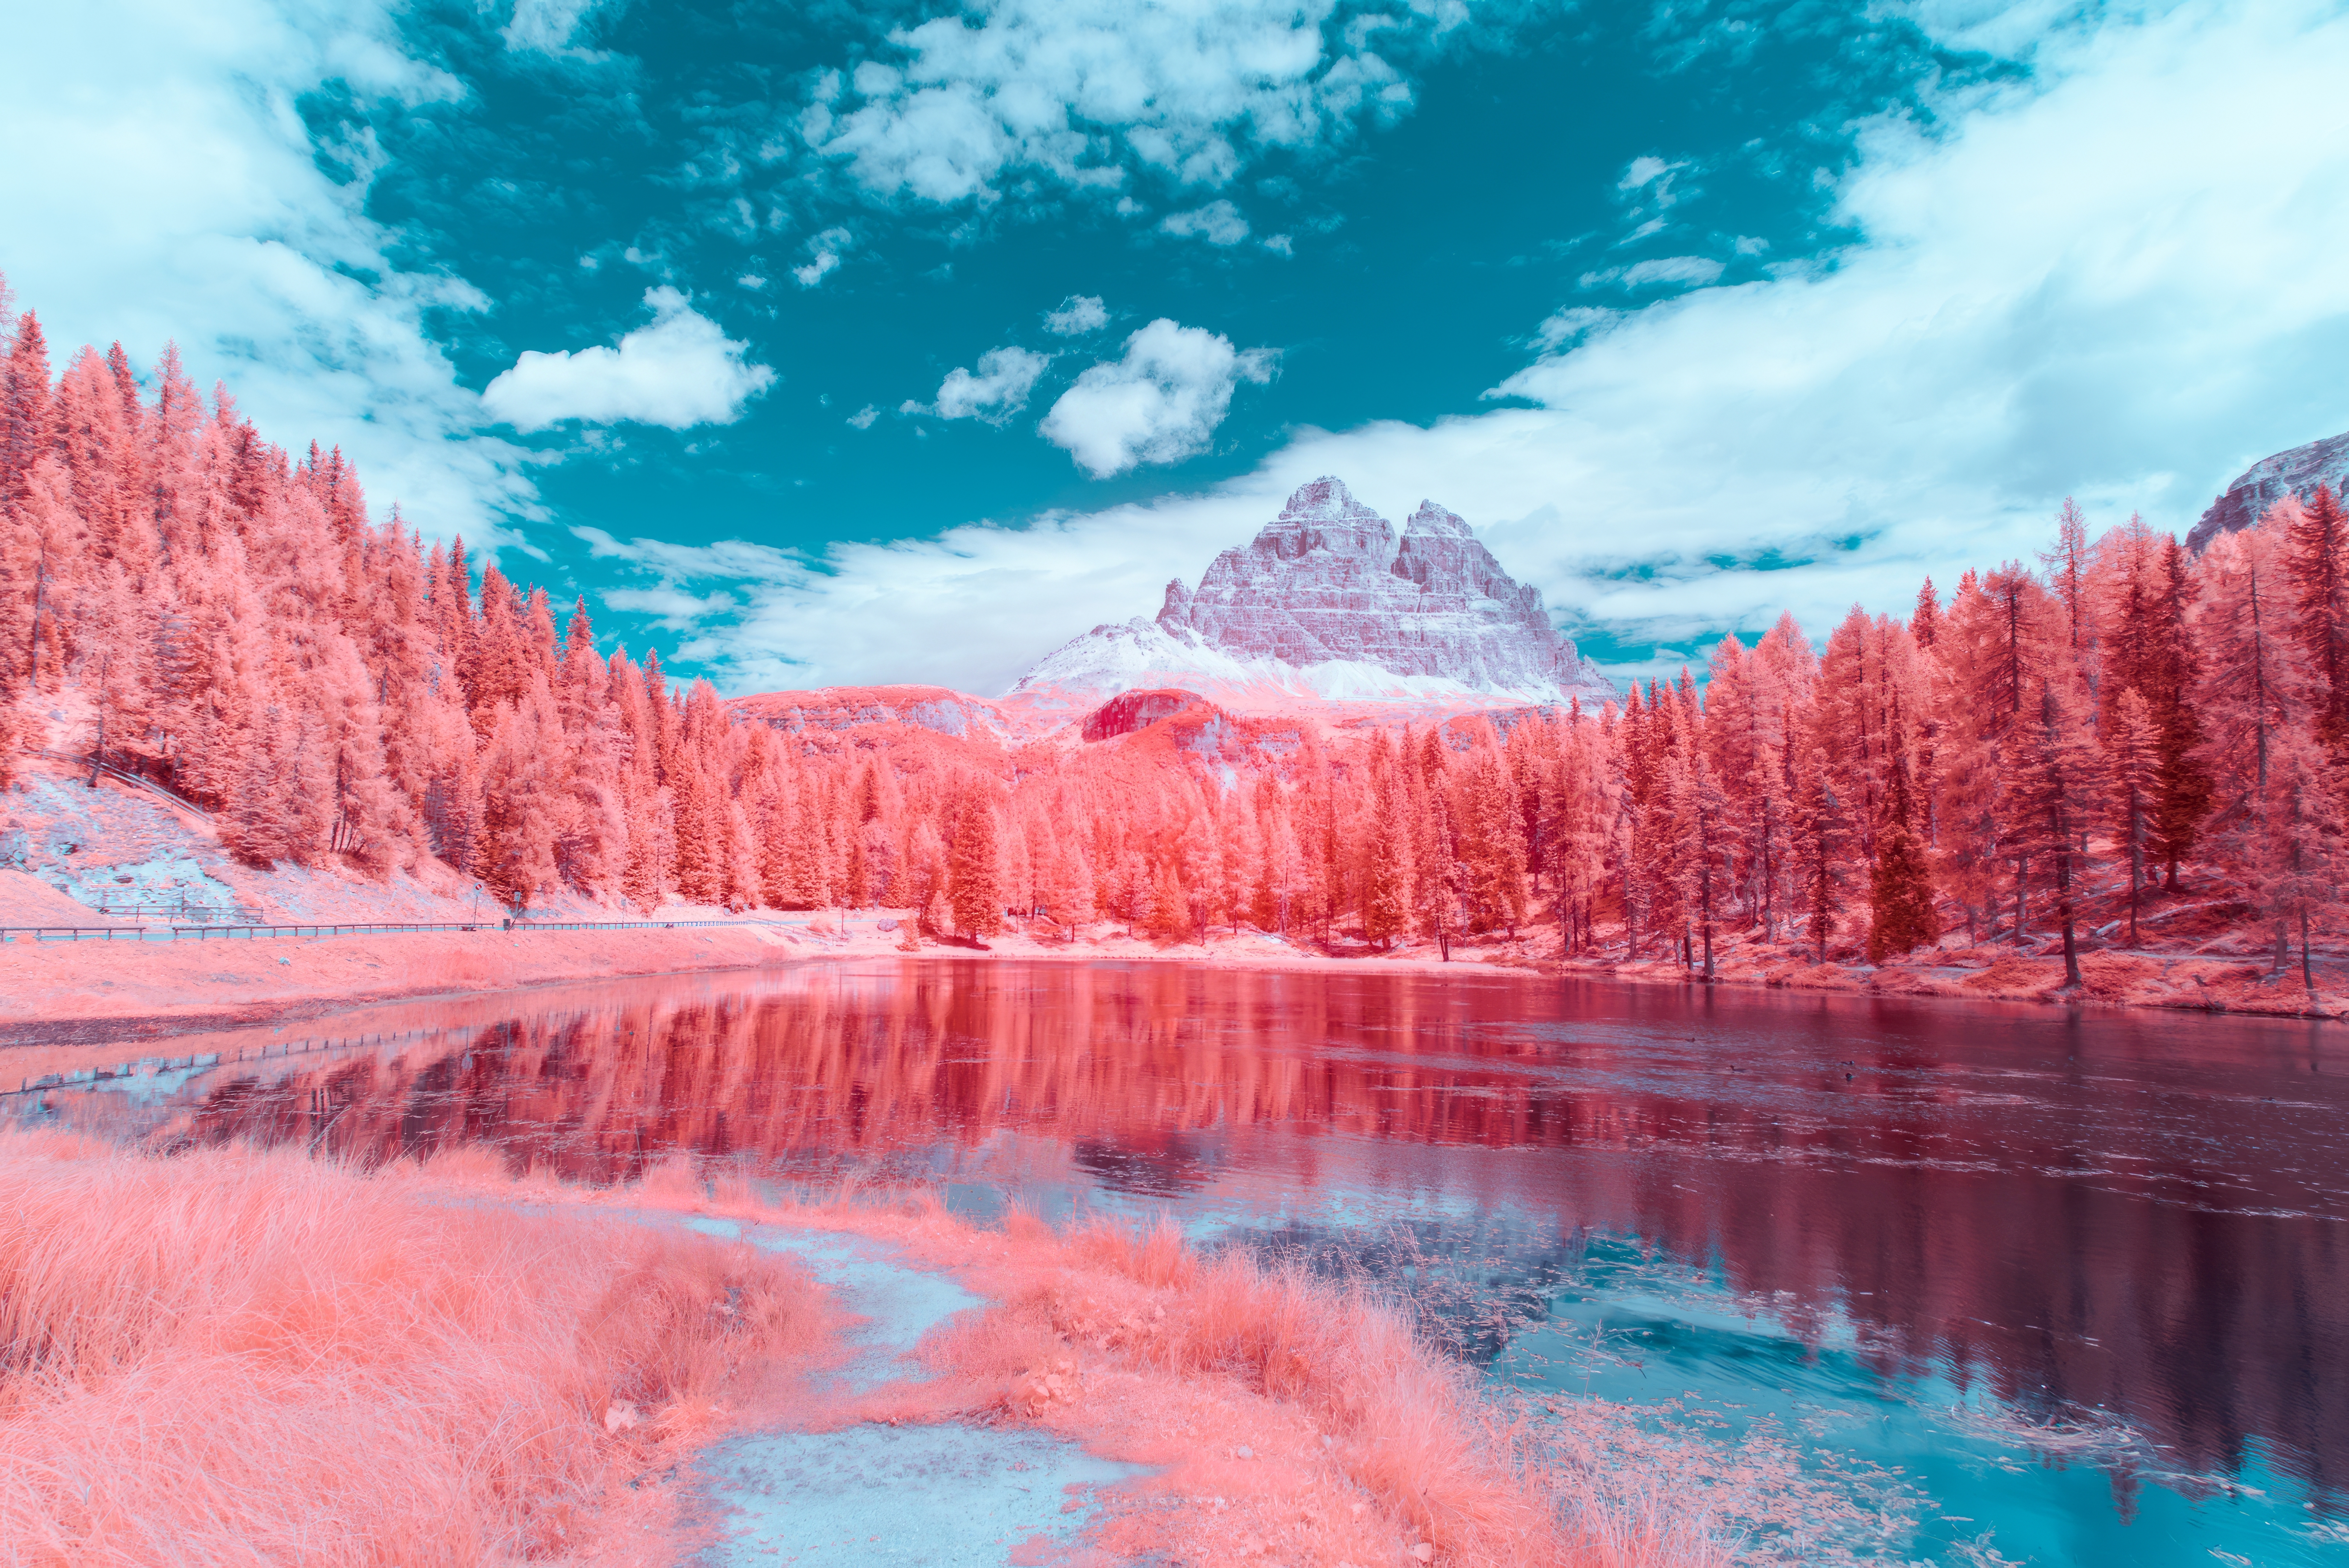 General 6400x4272 infrared sea trees pink water sky mountains clouds surreal